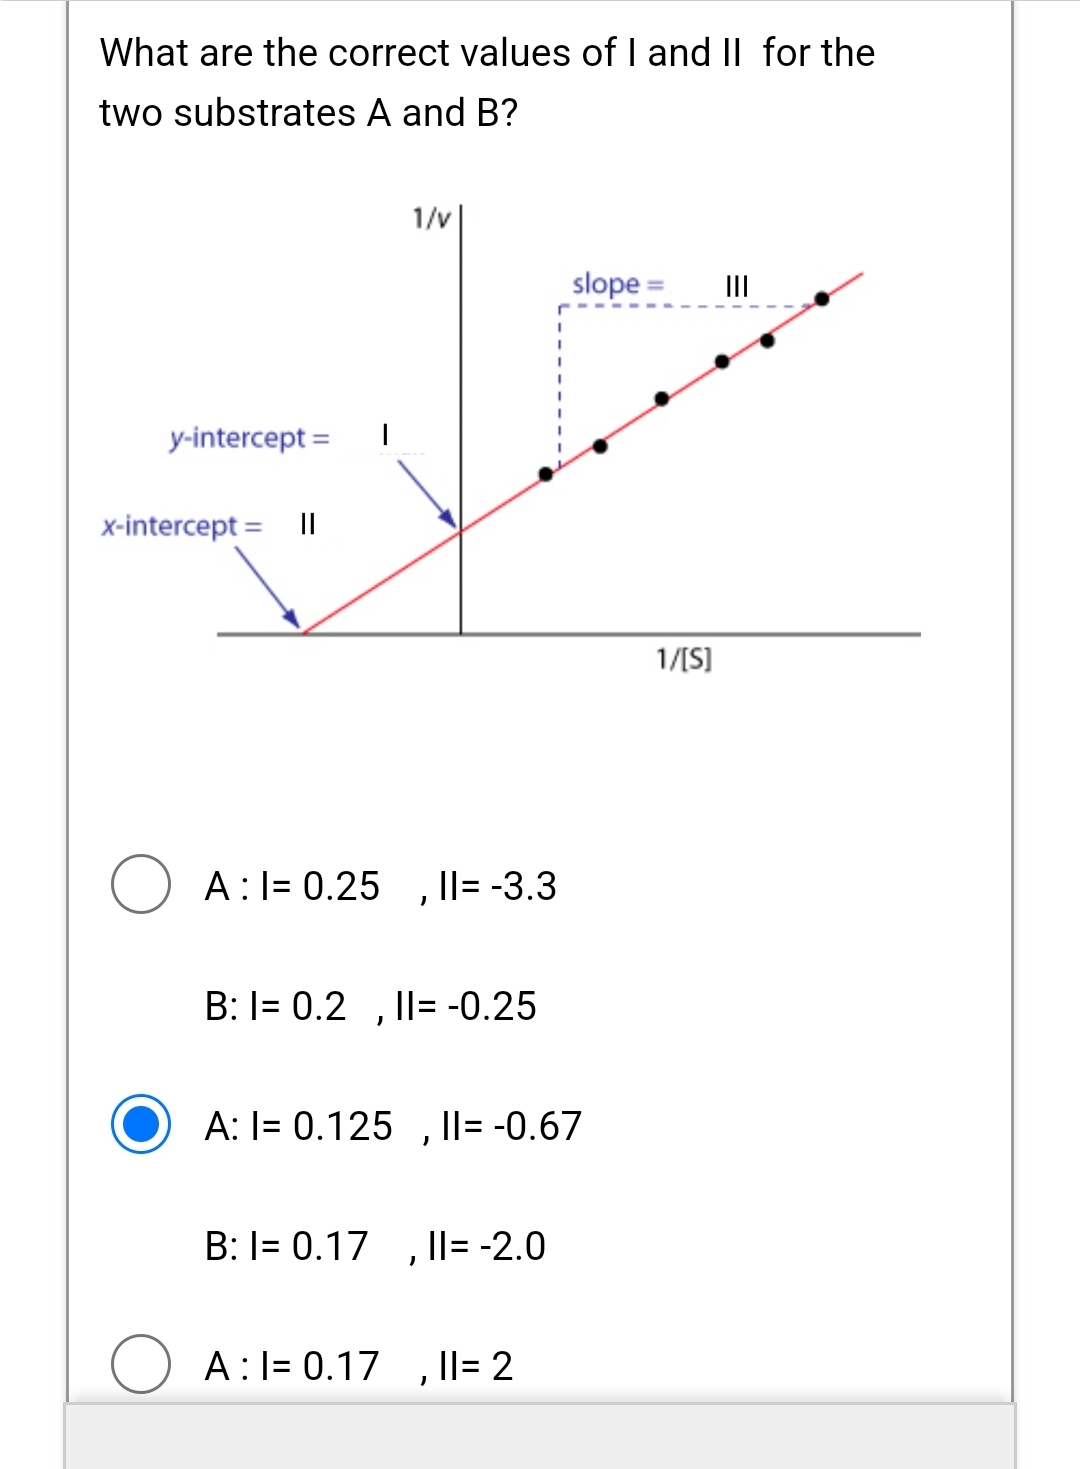 What are the correct values of I and II for the
two substrates A and B?
y-intercept =
x-intercept = ||
1/v
○ A : 1= 0.25
||= -3.3
B: I= 0.2, ||= -0.25
,
A: I= 0.125, II= -0.67
'
B: I= 0.17, II= -2.0
A: I= 0.17
||= 2
,
slope =
III
1/[S]